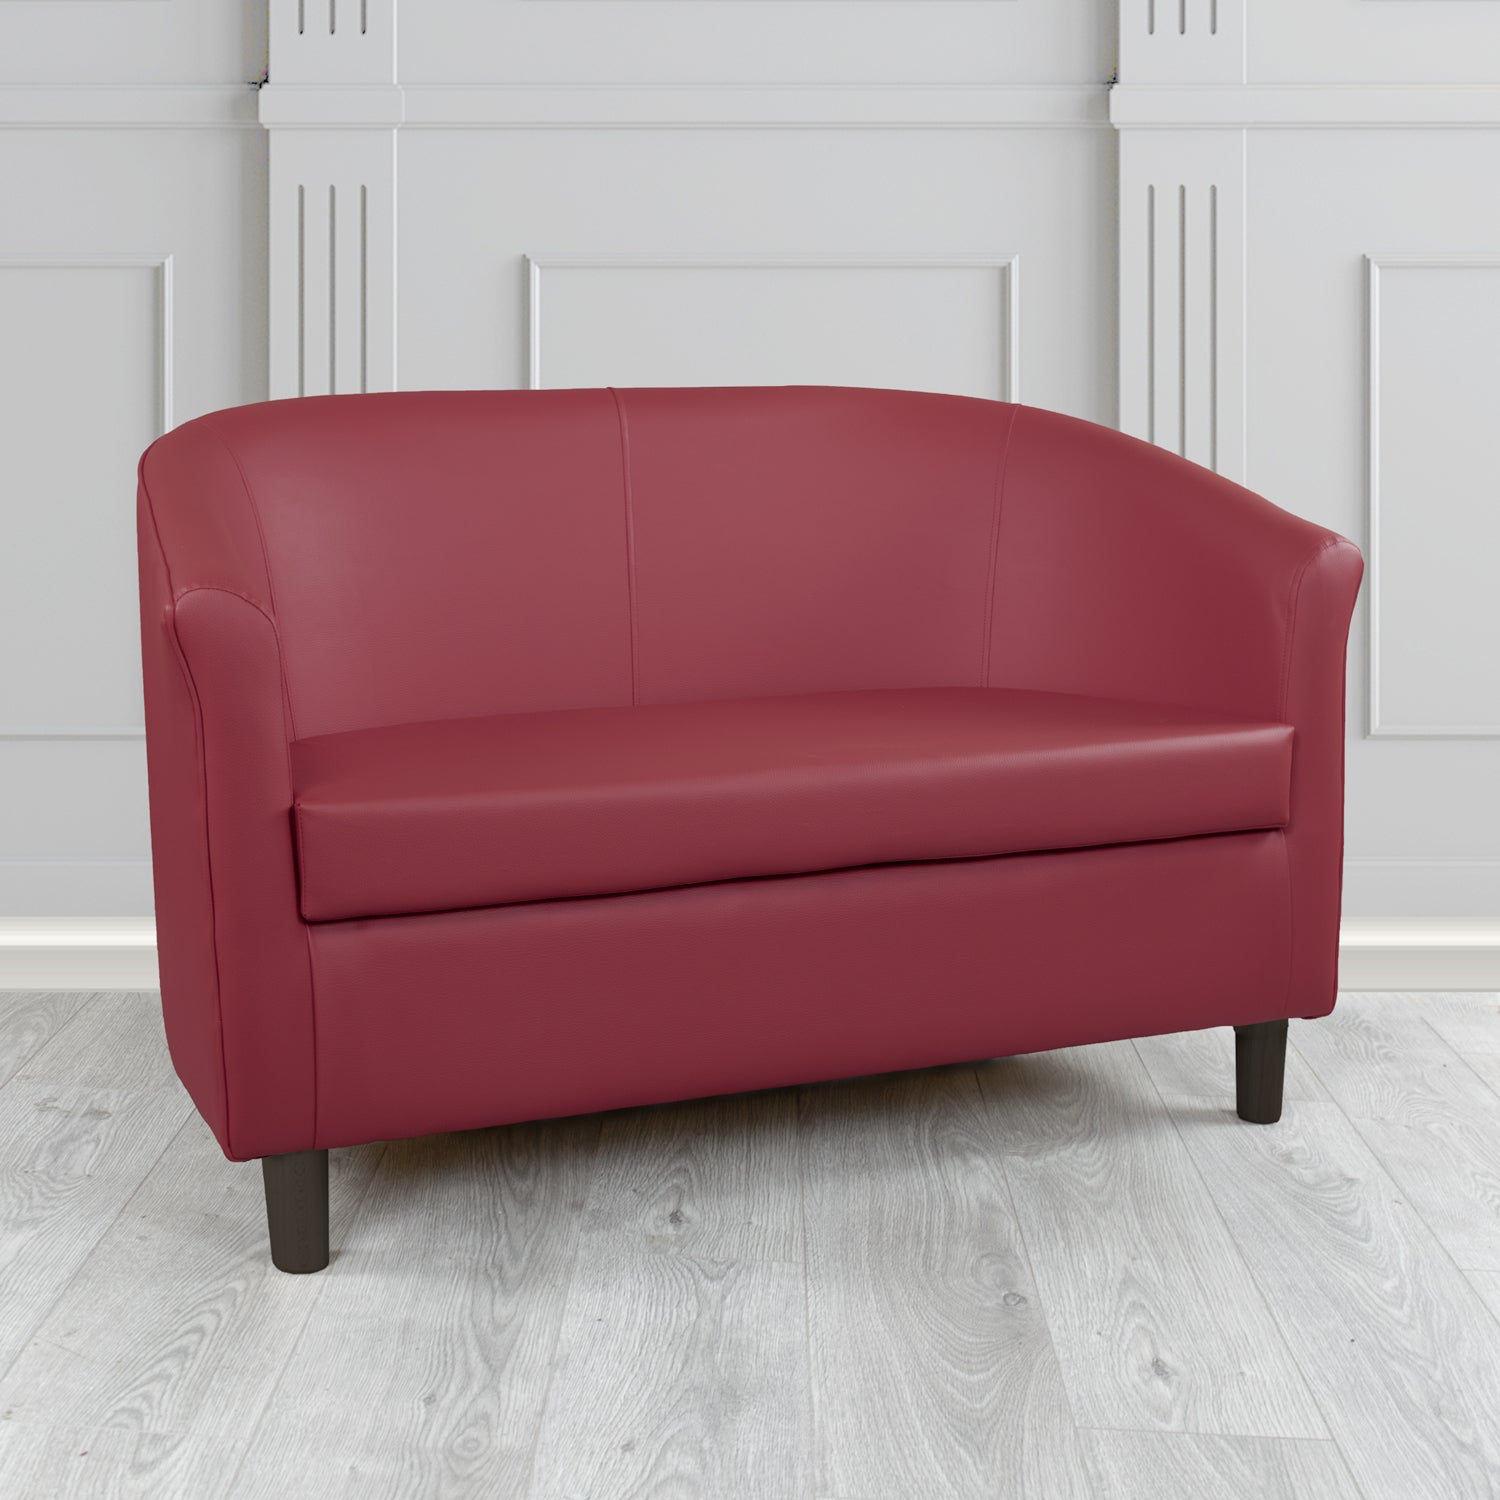 Tuscany Just Colour Jazzberry Crib 5 Faux Leather 2 Seater Tub Sofa - The Tub Chair Shop